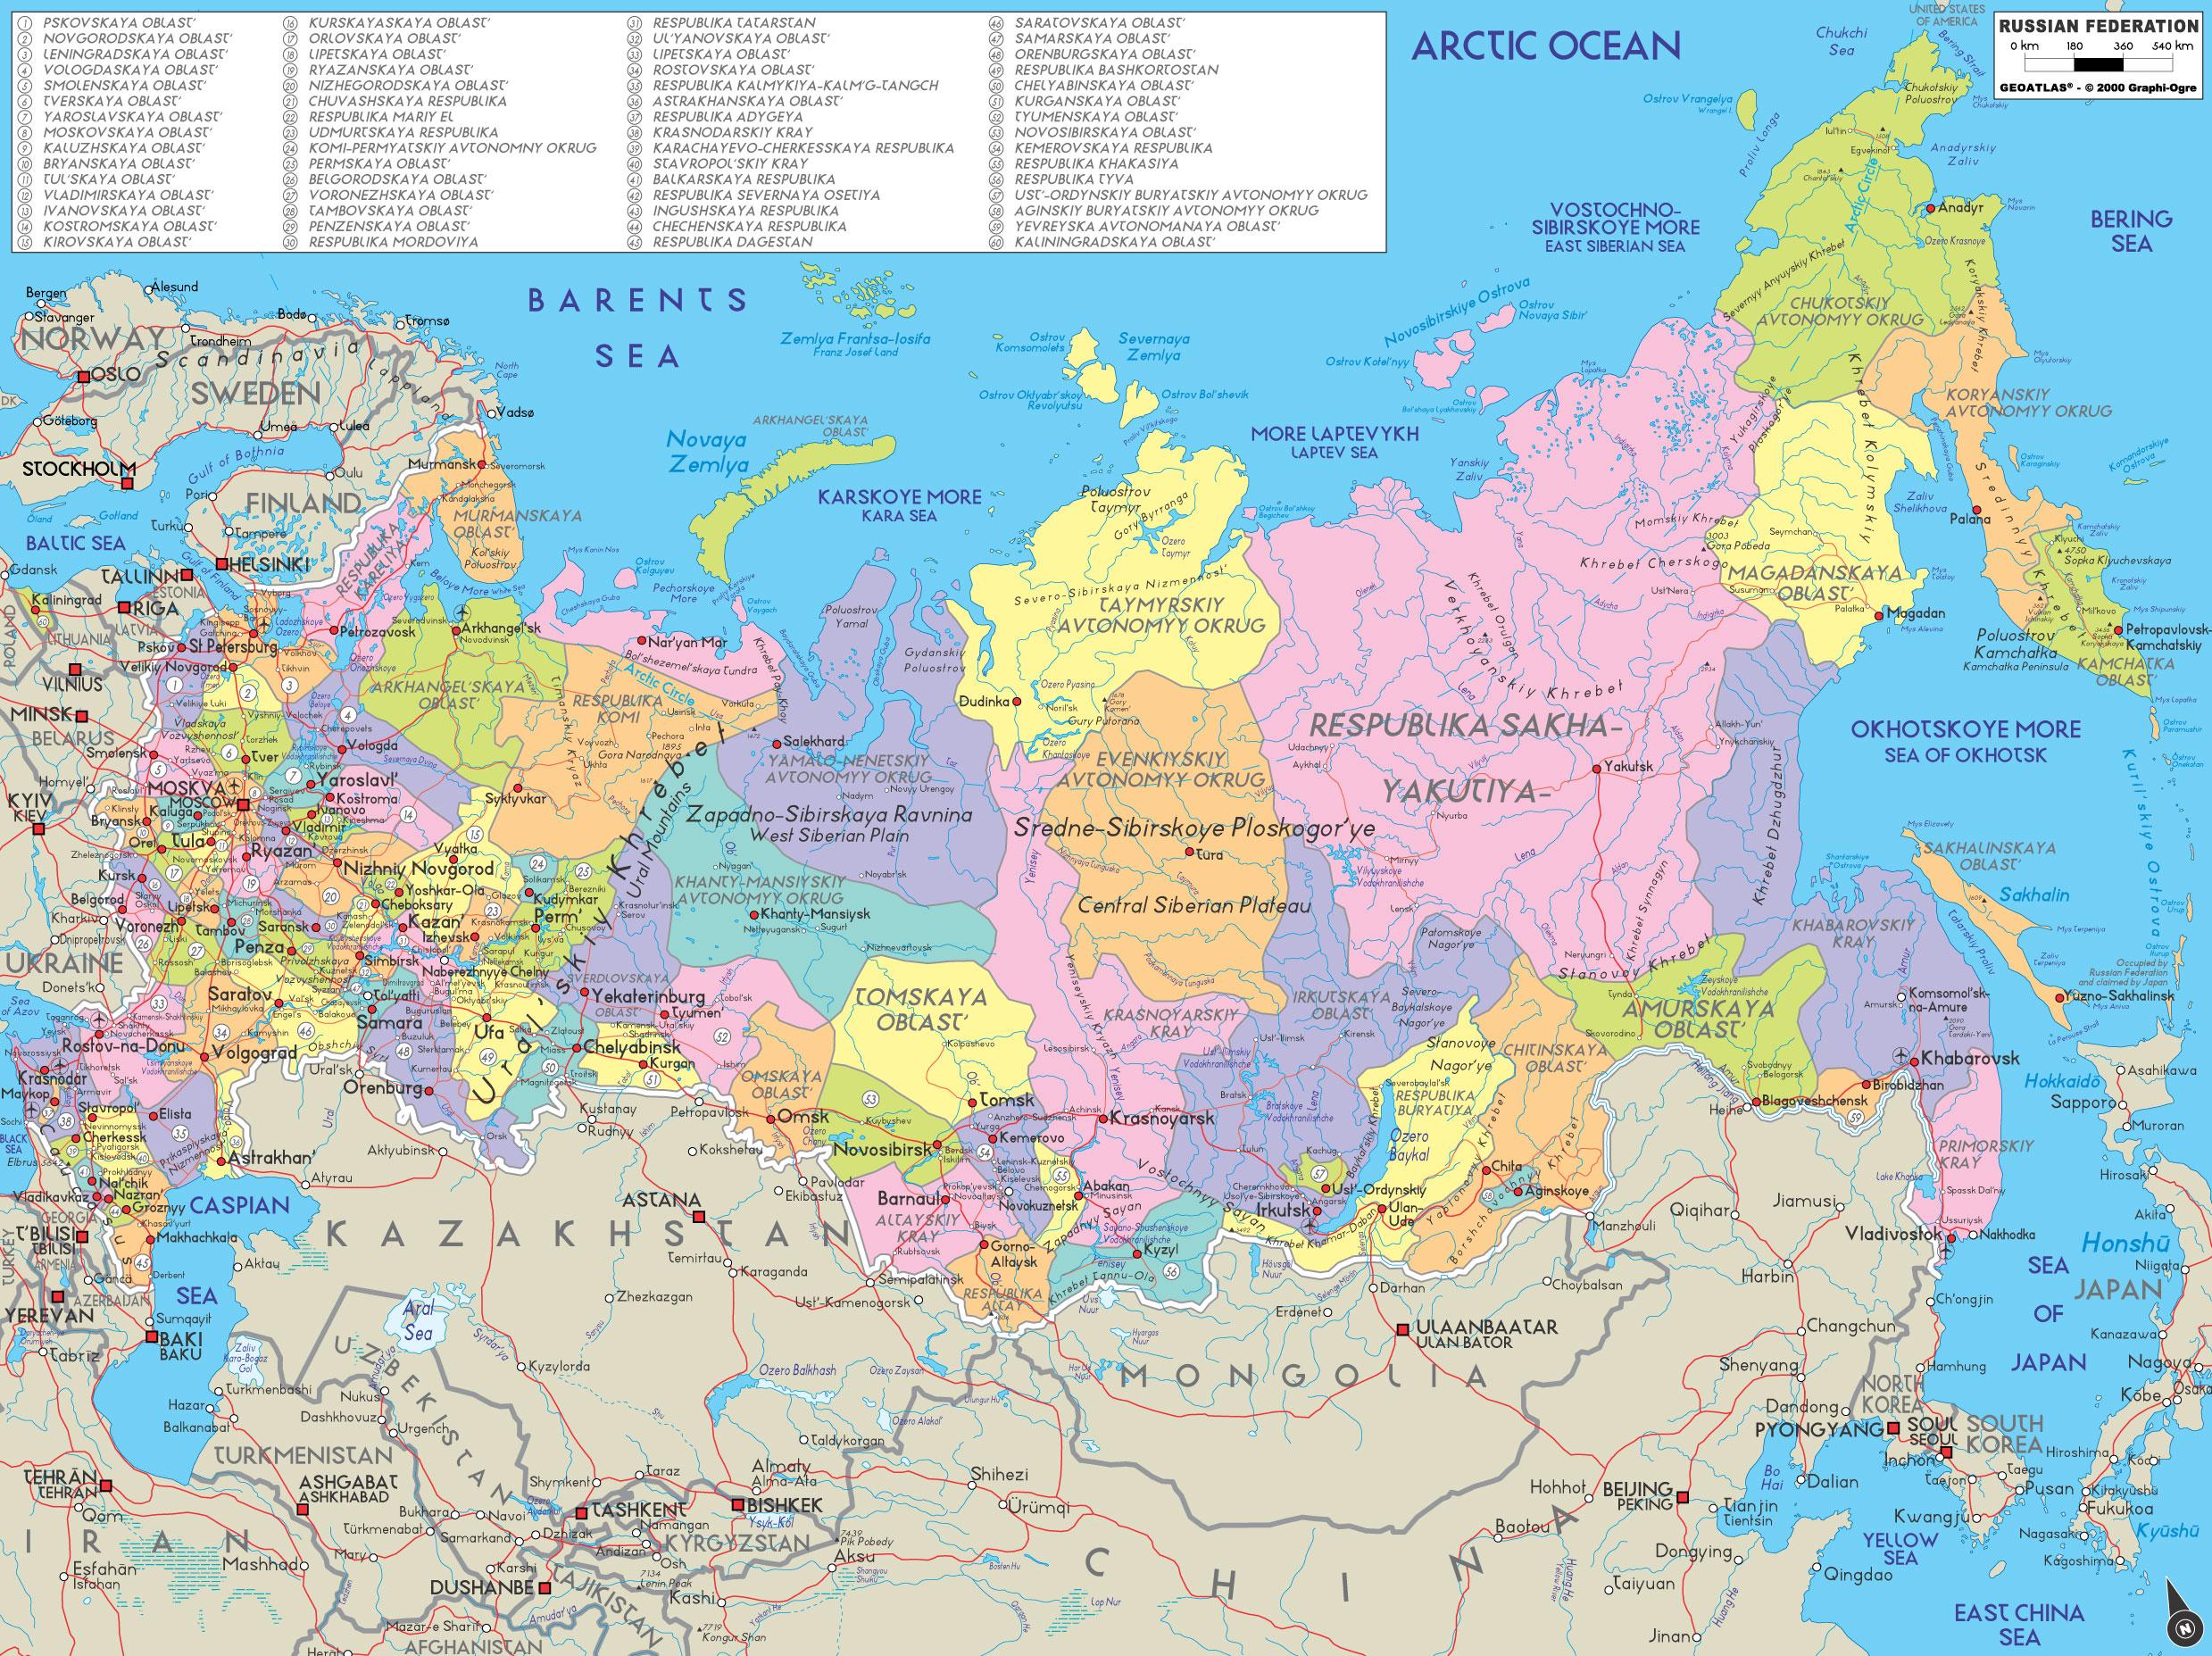 world map of moscow russia - Google Search